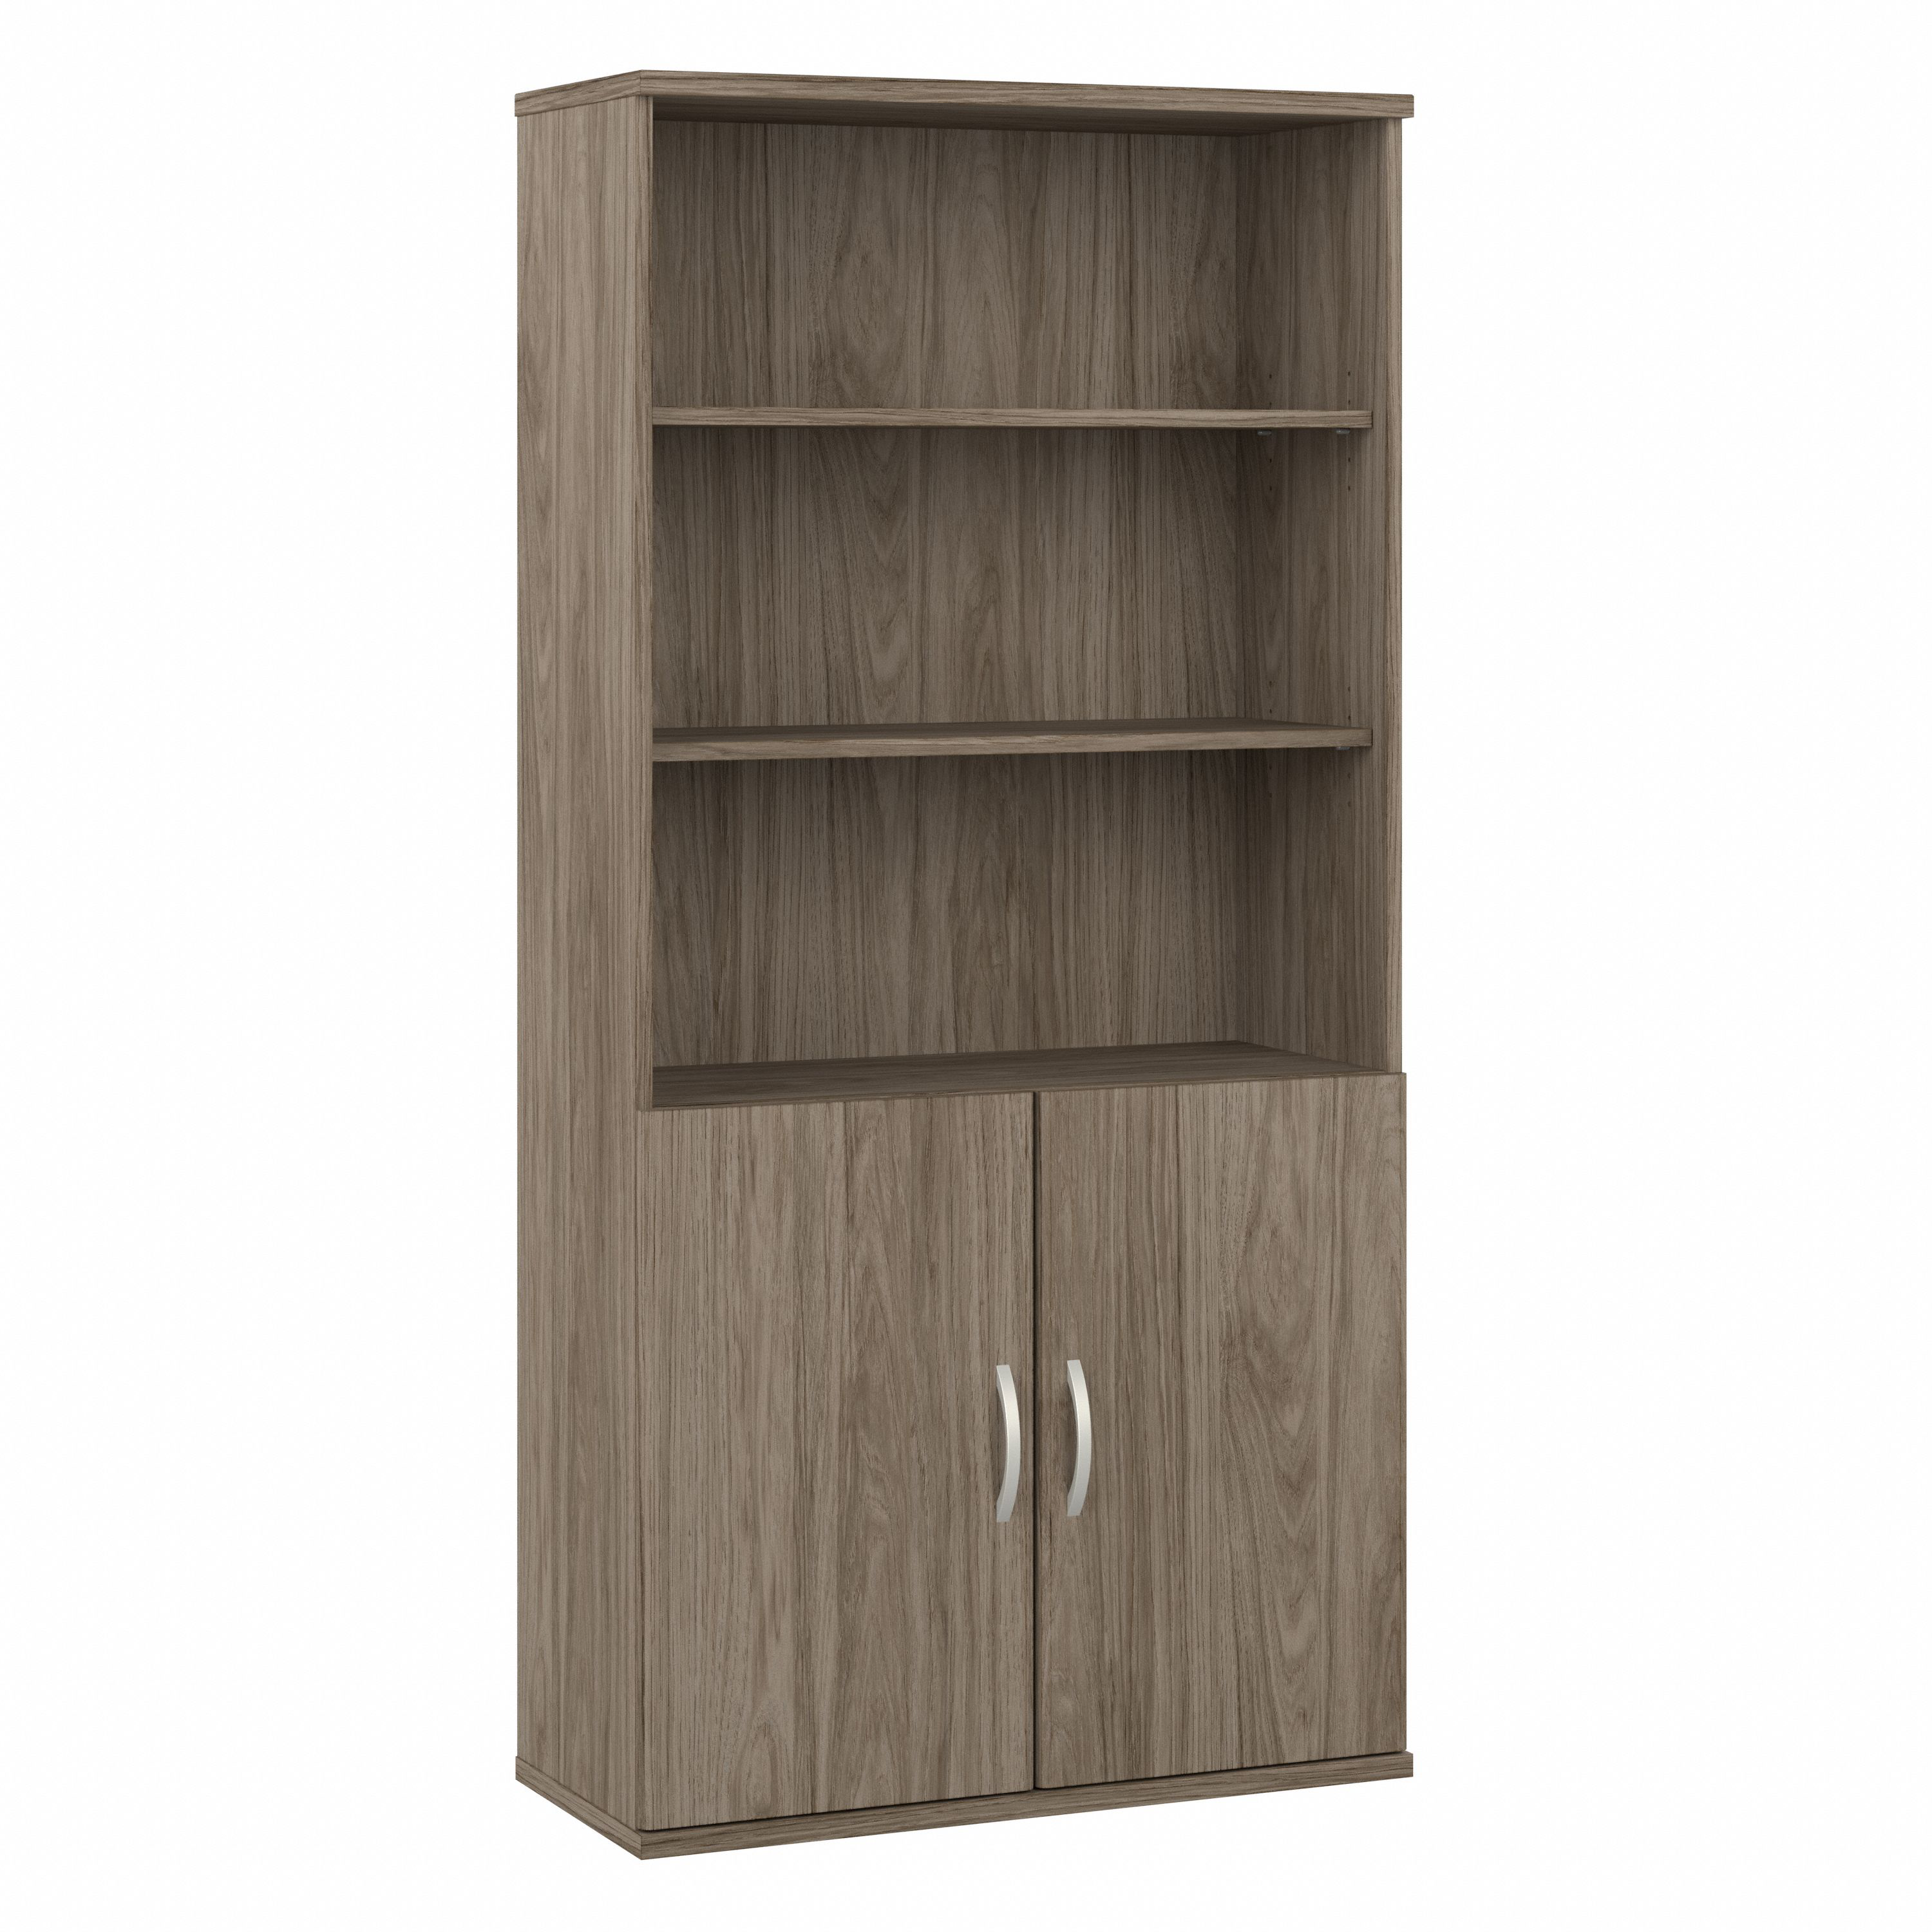 Shop Bush Business Furniture Hybrid Tall 5 Shelf Bookcase with Doors 02 HYB024MH #color_modern hickory